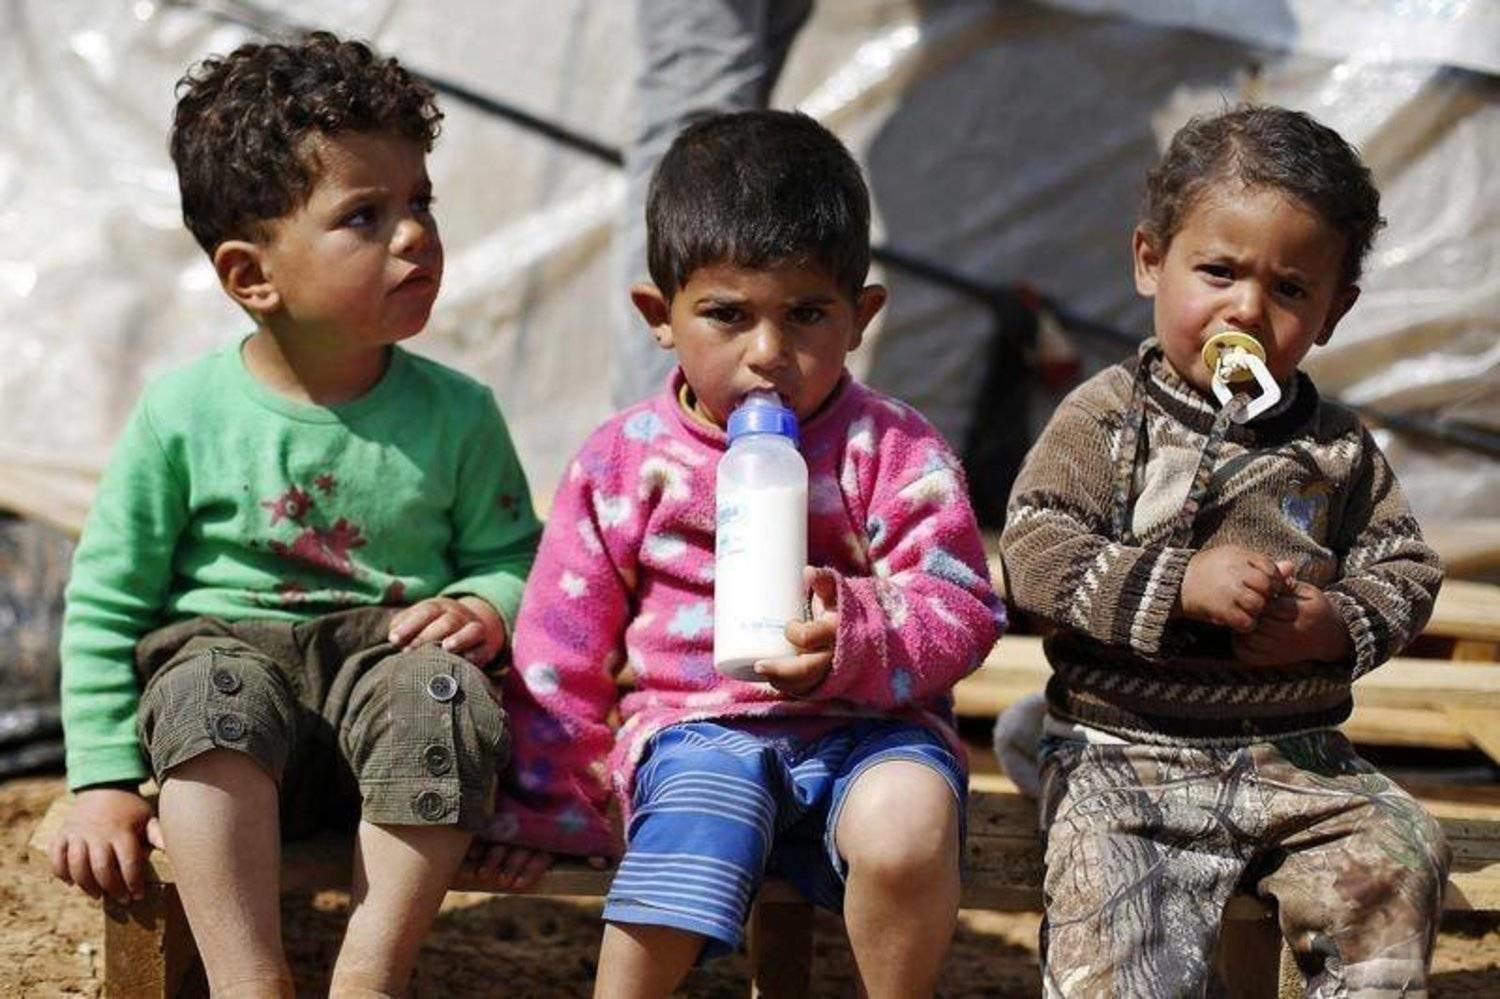 Displaced Syrian children are seen at a refugee camp near Amman, Jordan. Reuters file photo